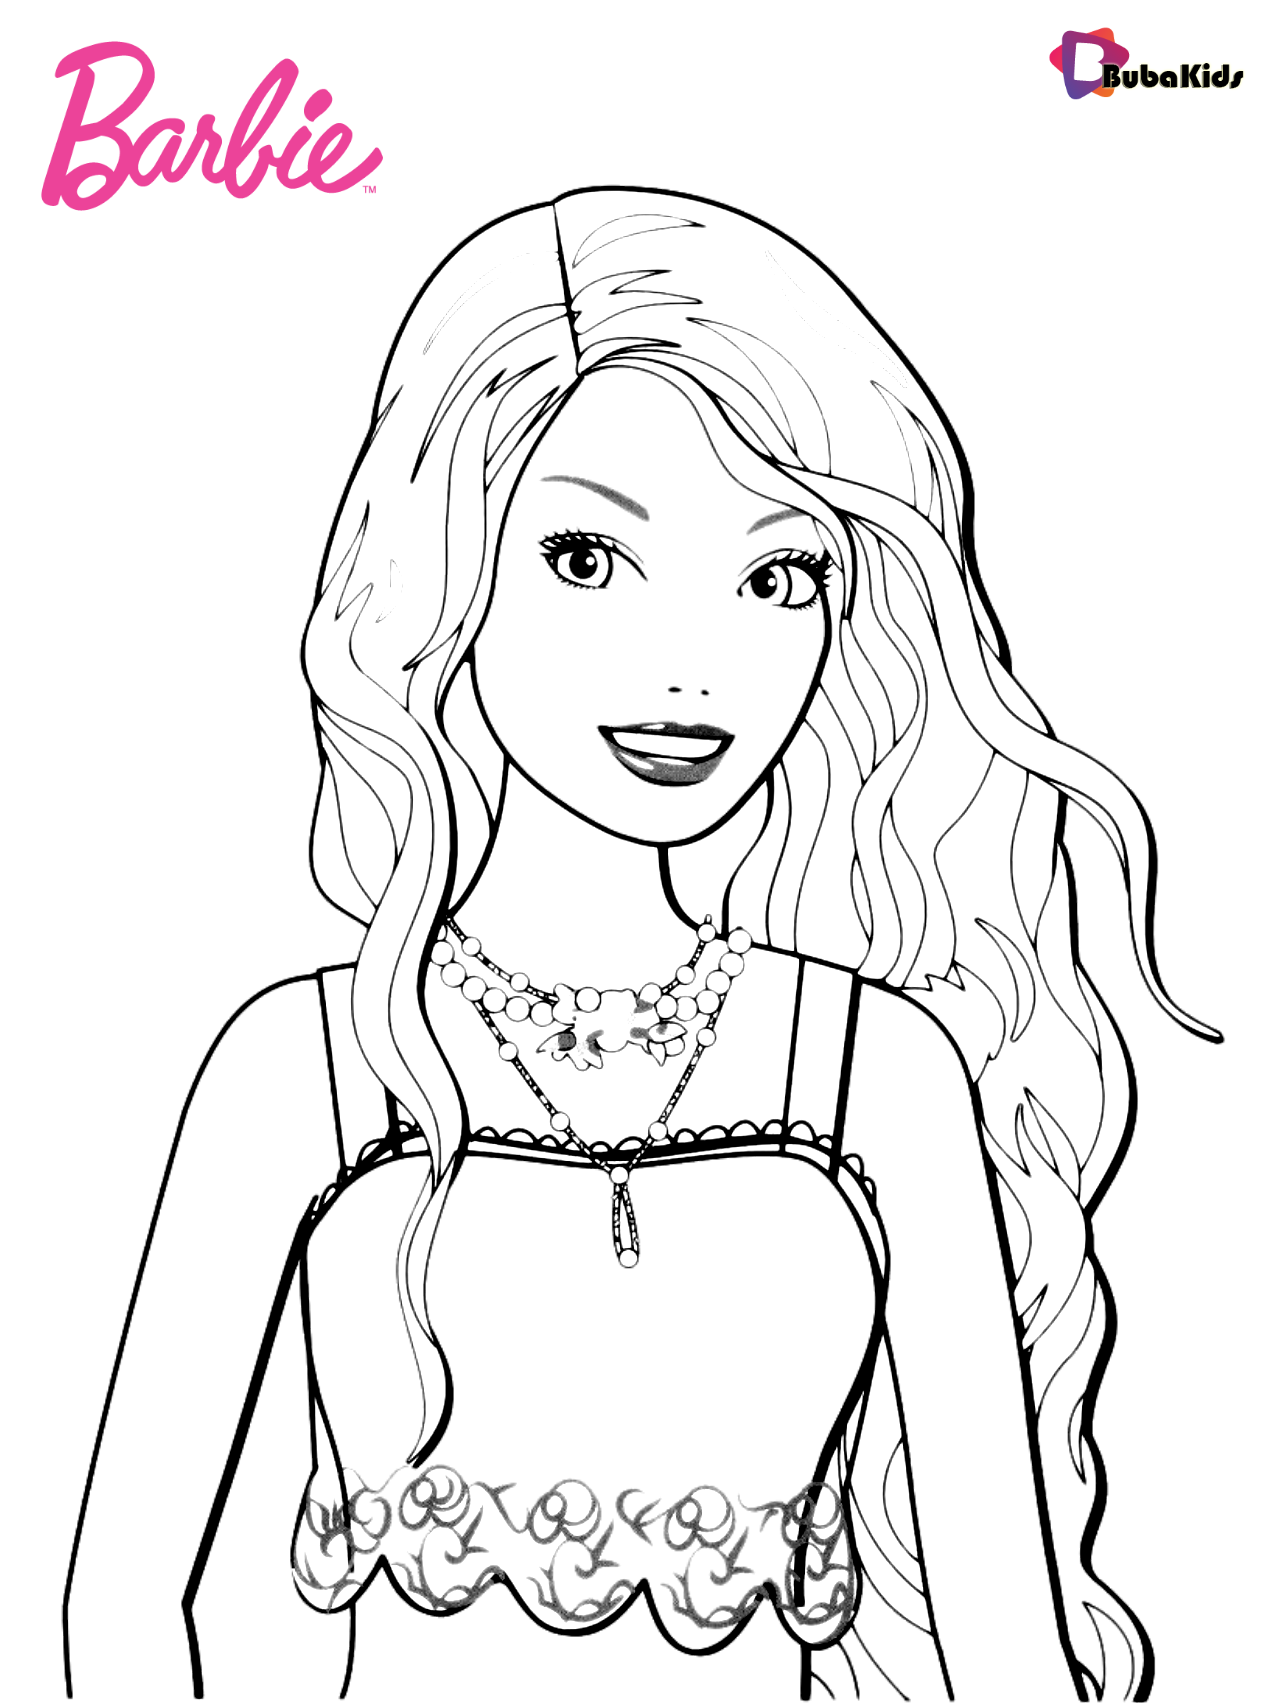 Barbie coloring pages free download Wallpaper